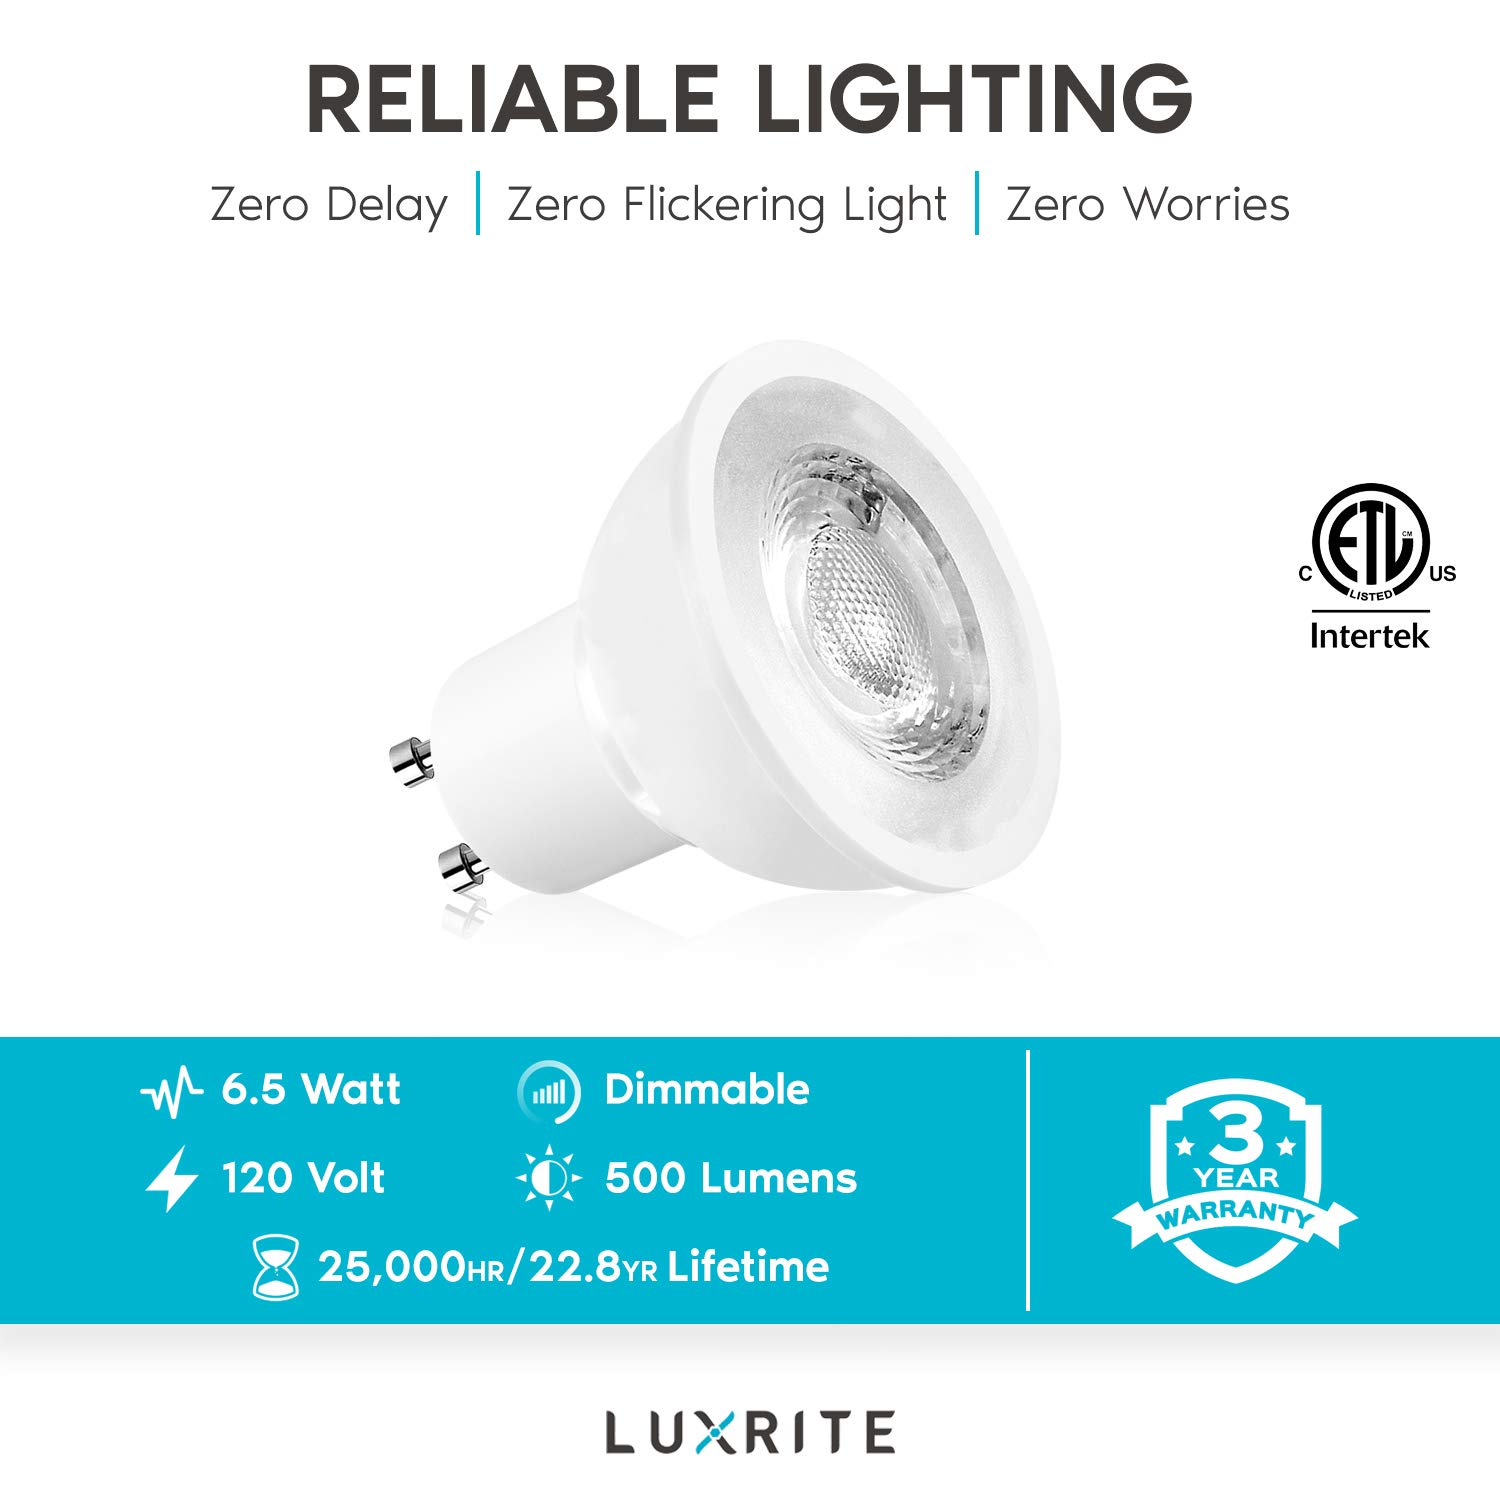 LUXRITE MR16 GU10 LED Bulbs Dimmable, 50W Halogen Equivalent, 2700K Warm White, 500 Lumens, 120V Spotlight LED Bulb GU10, Enclosed Fixture Rated, Perfect for Landscape or Home Lighting (12 Pack)